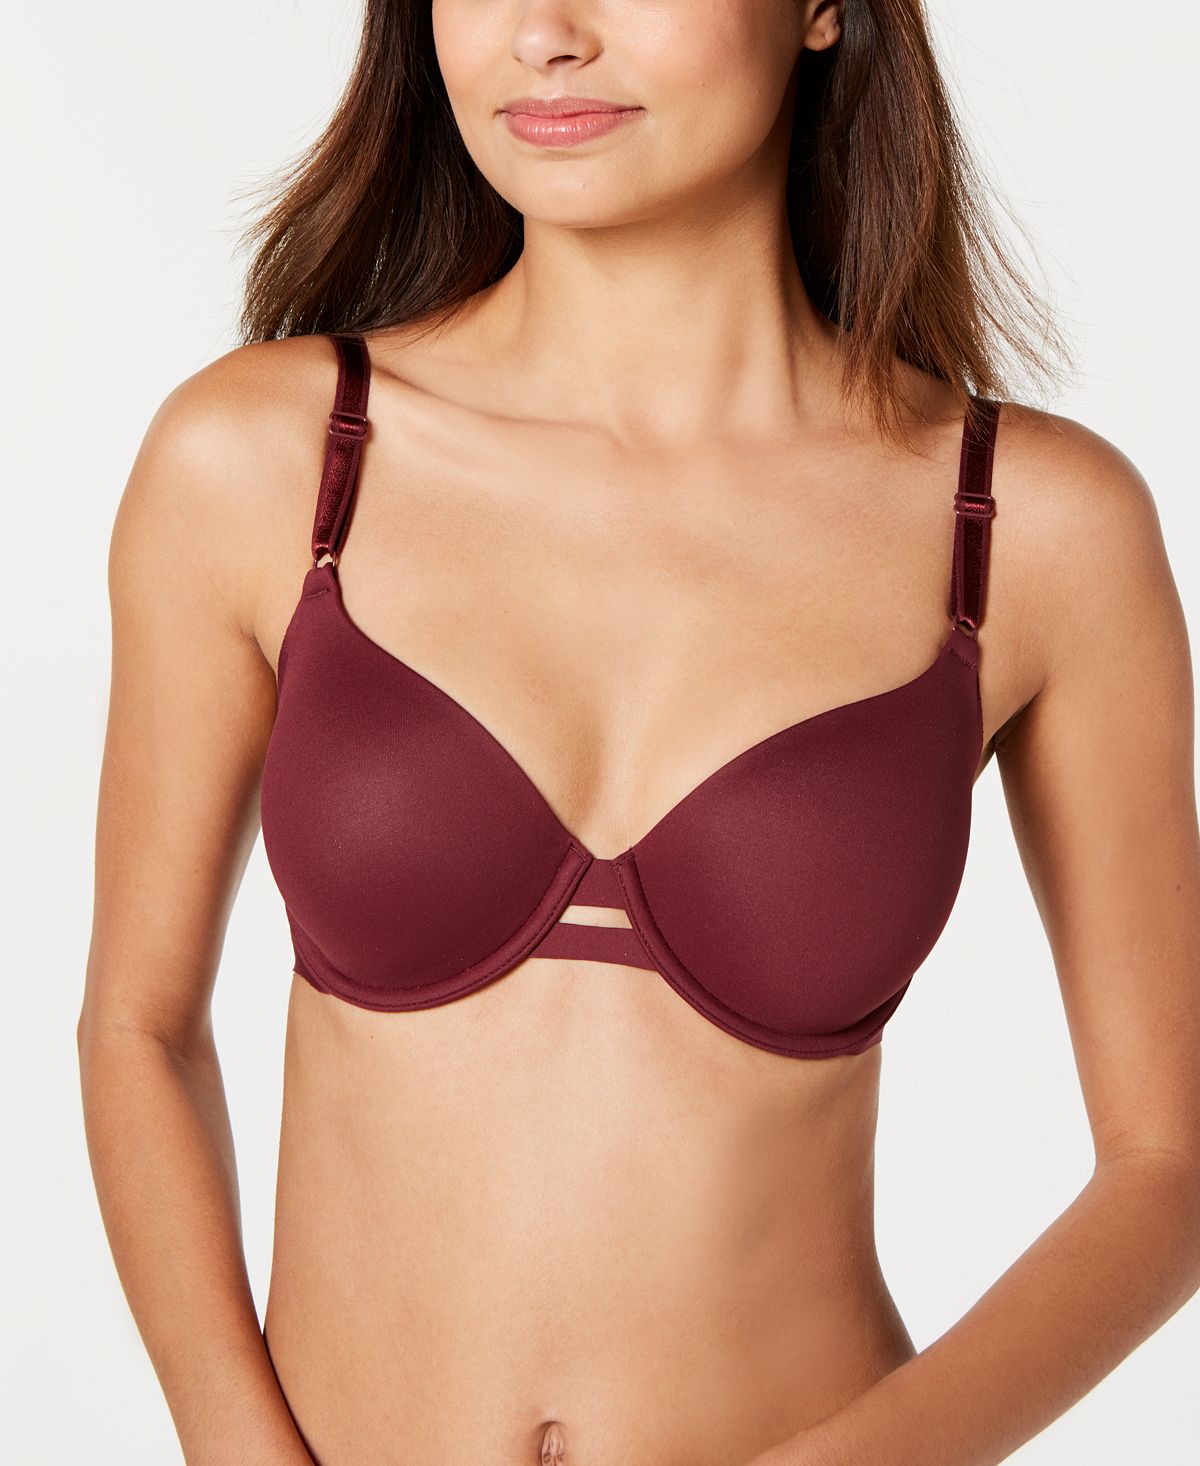 Calvin Klein Invisibles Full Coverage T-shirt Bra Qf1184 Phoebe